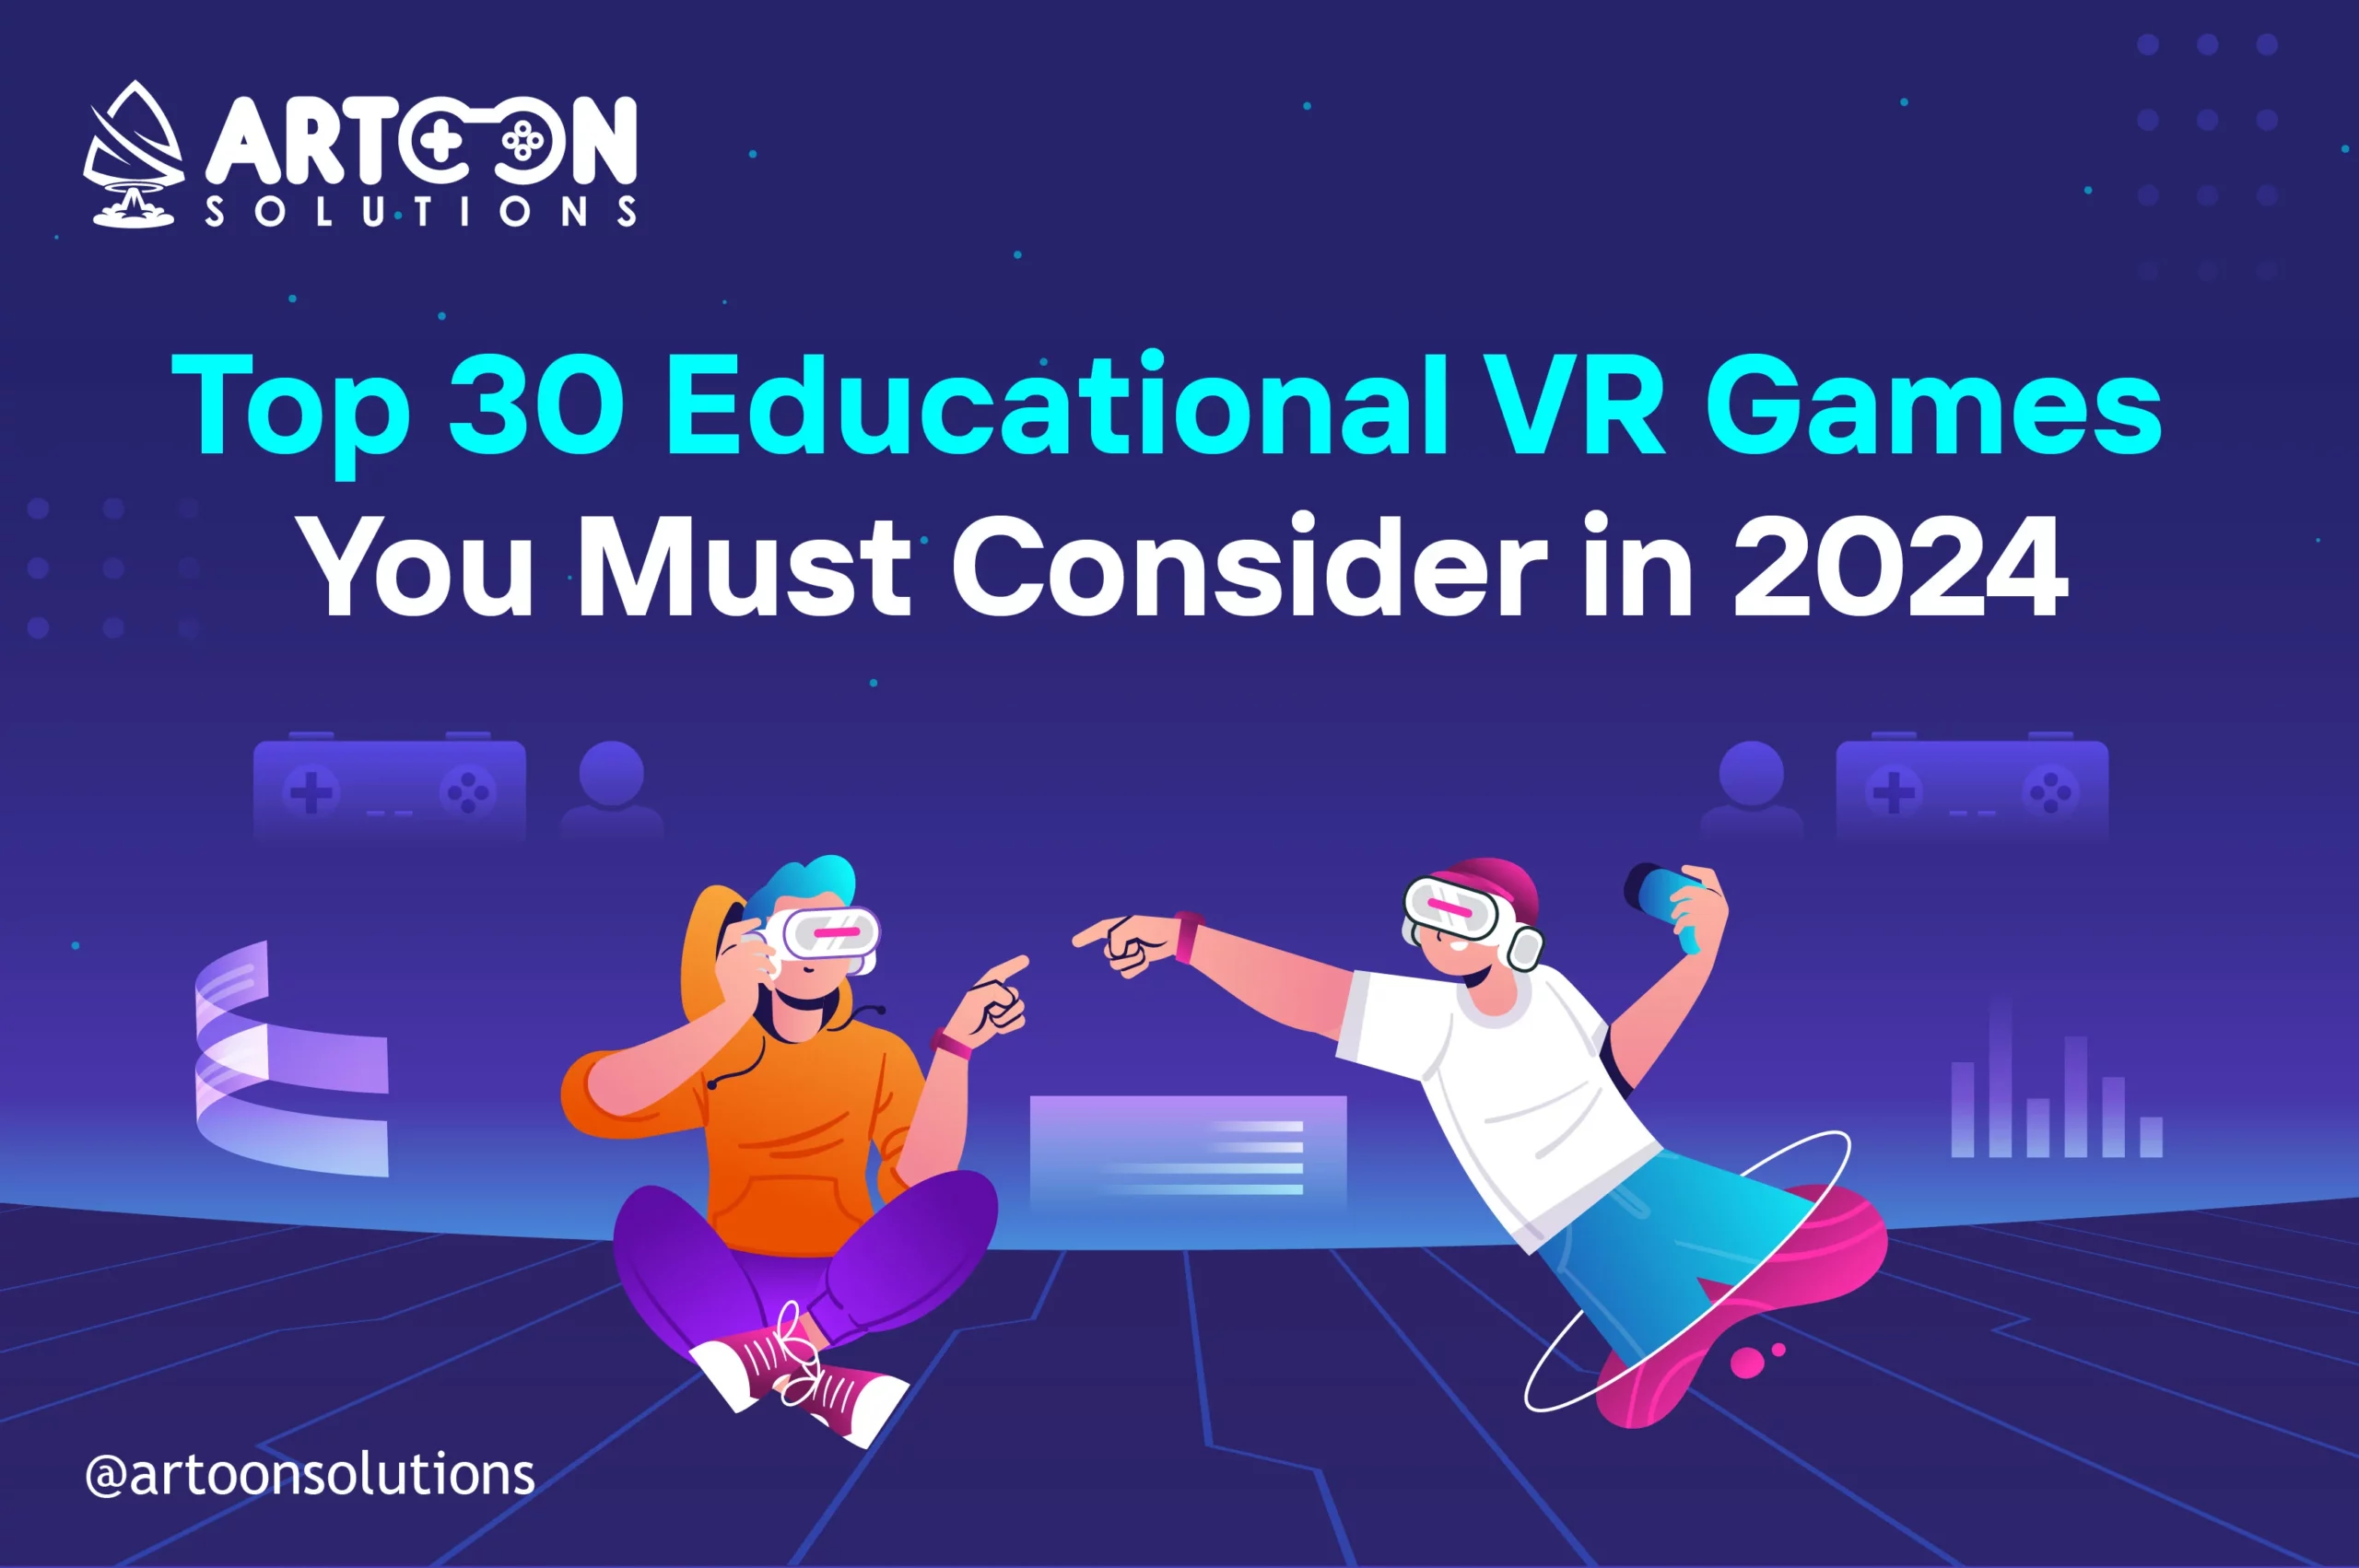 Top 30 Educational VR Games You Must Consider in 2024